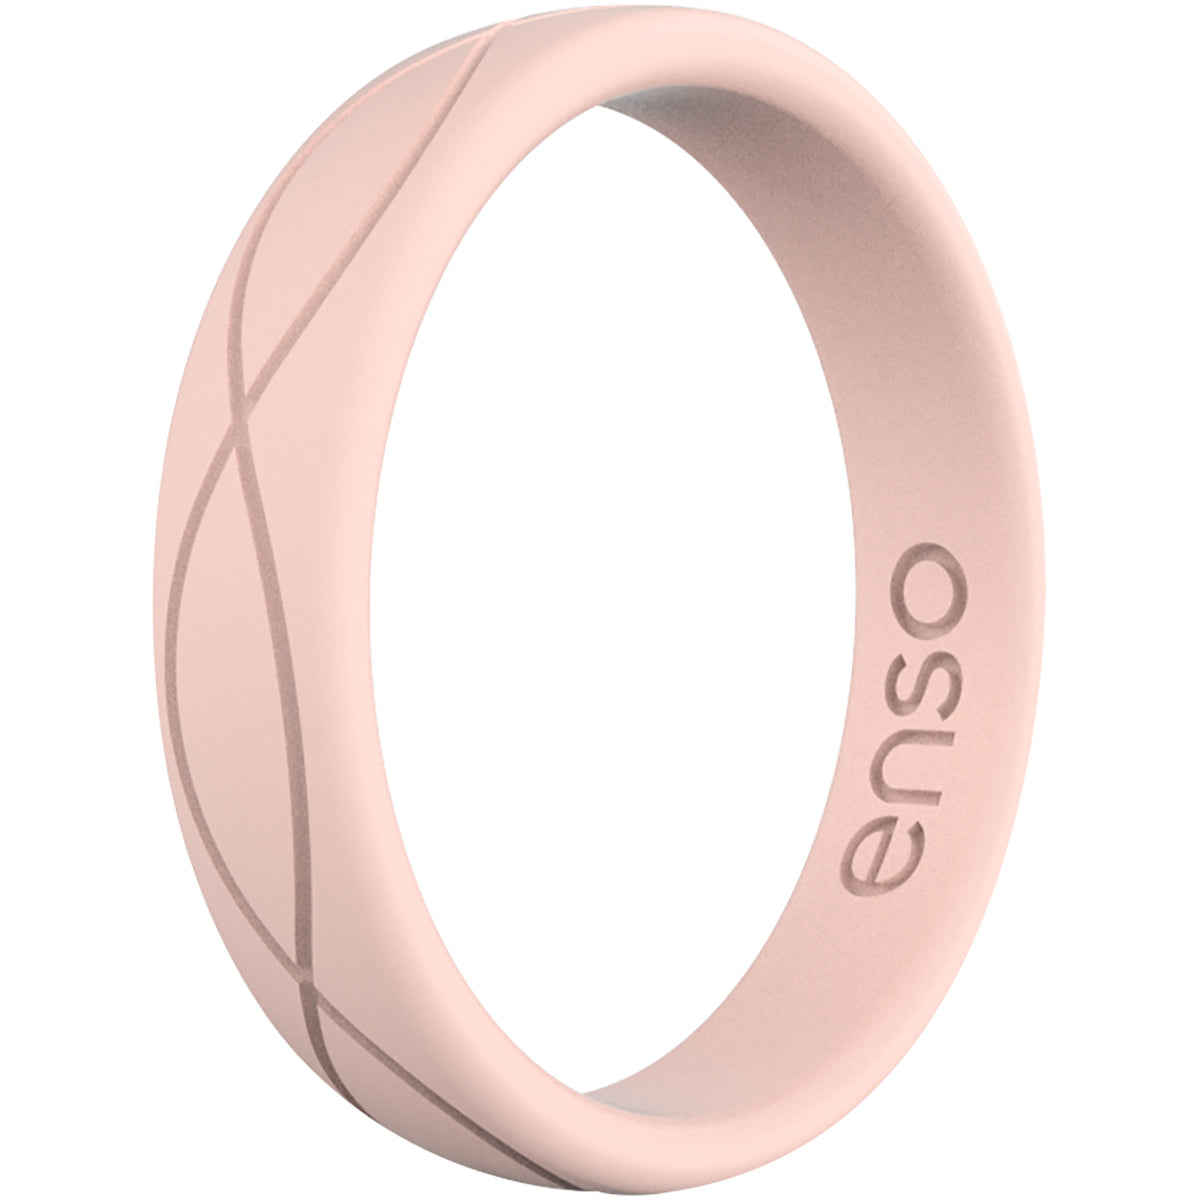 Enso Rings Women's Infinity Series Silicone Ring - Pink Sand Enso Rings